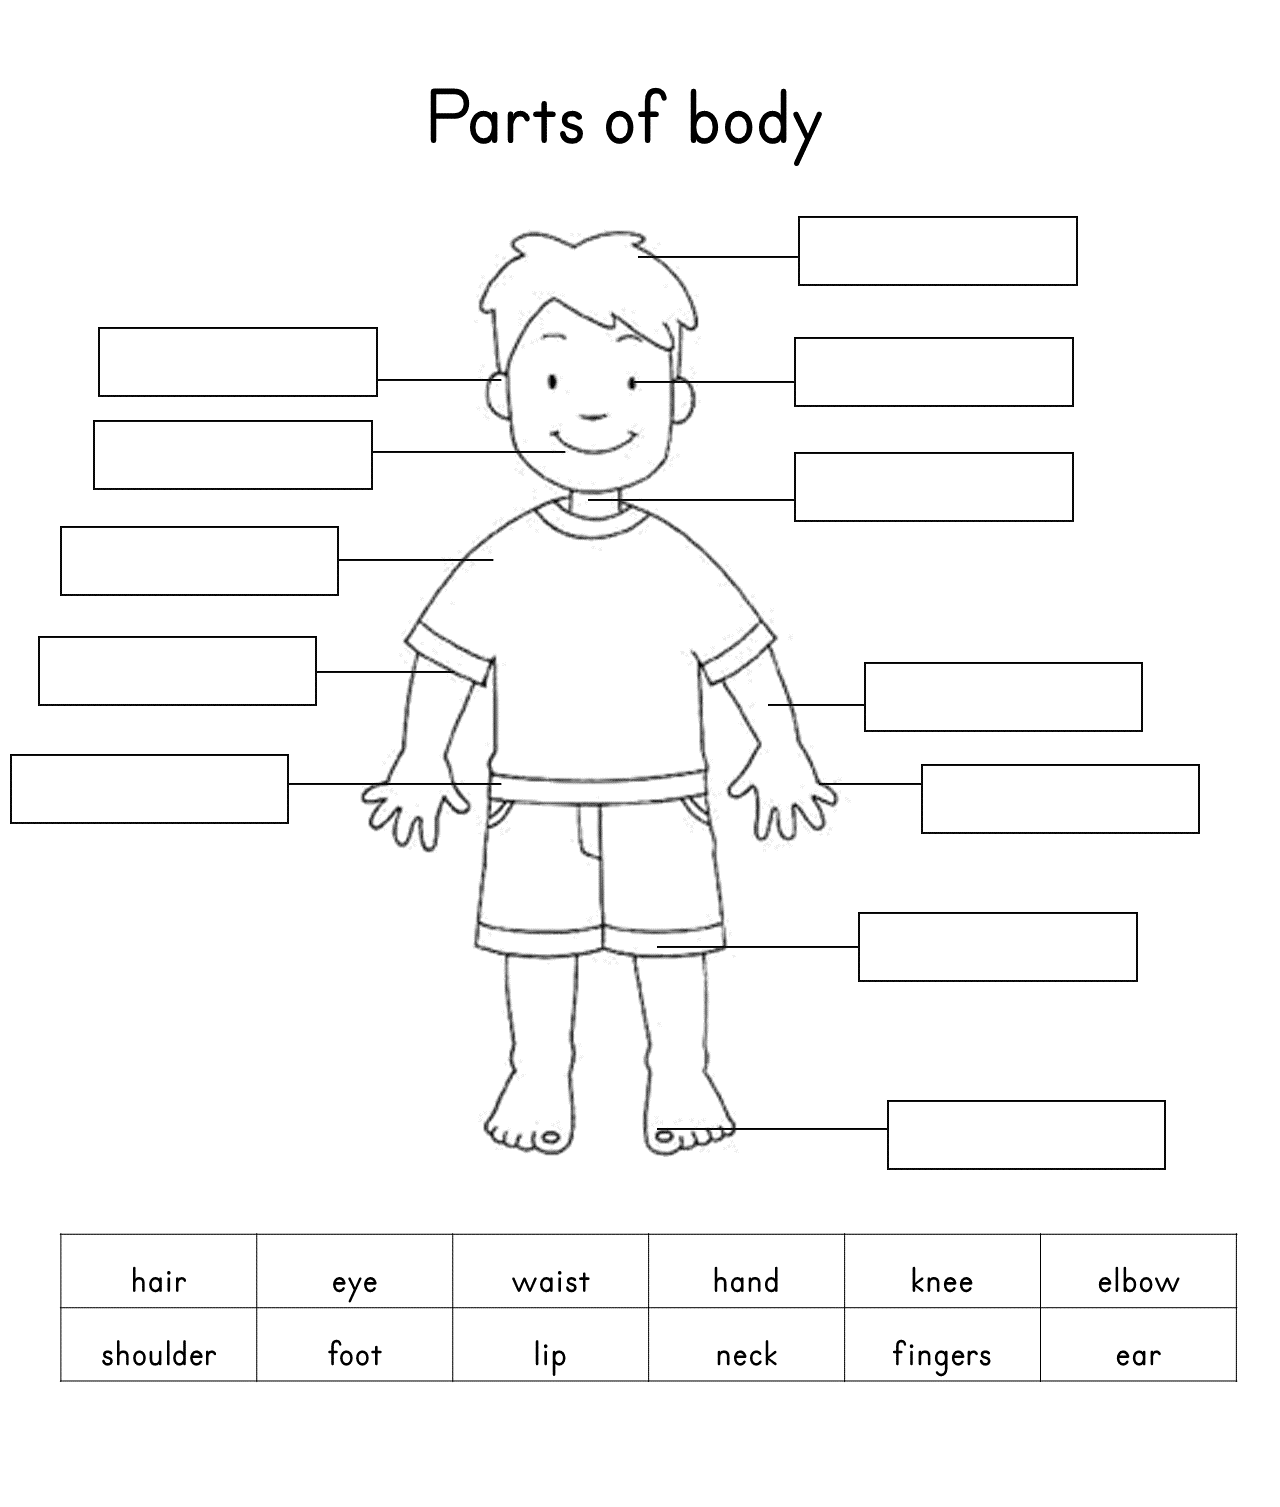 Human Body Parts | Body Parts worksheet | List the Body Parts